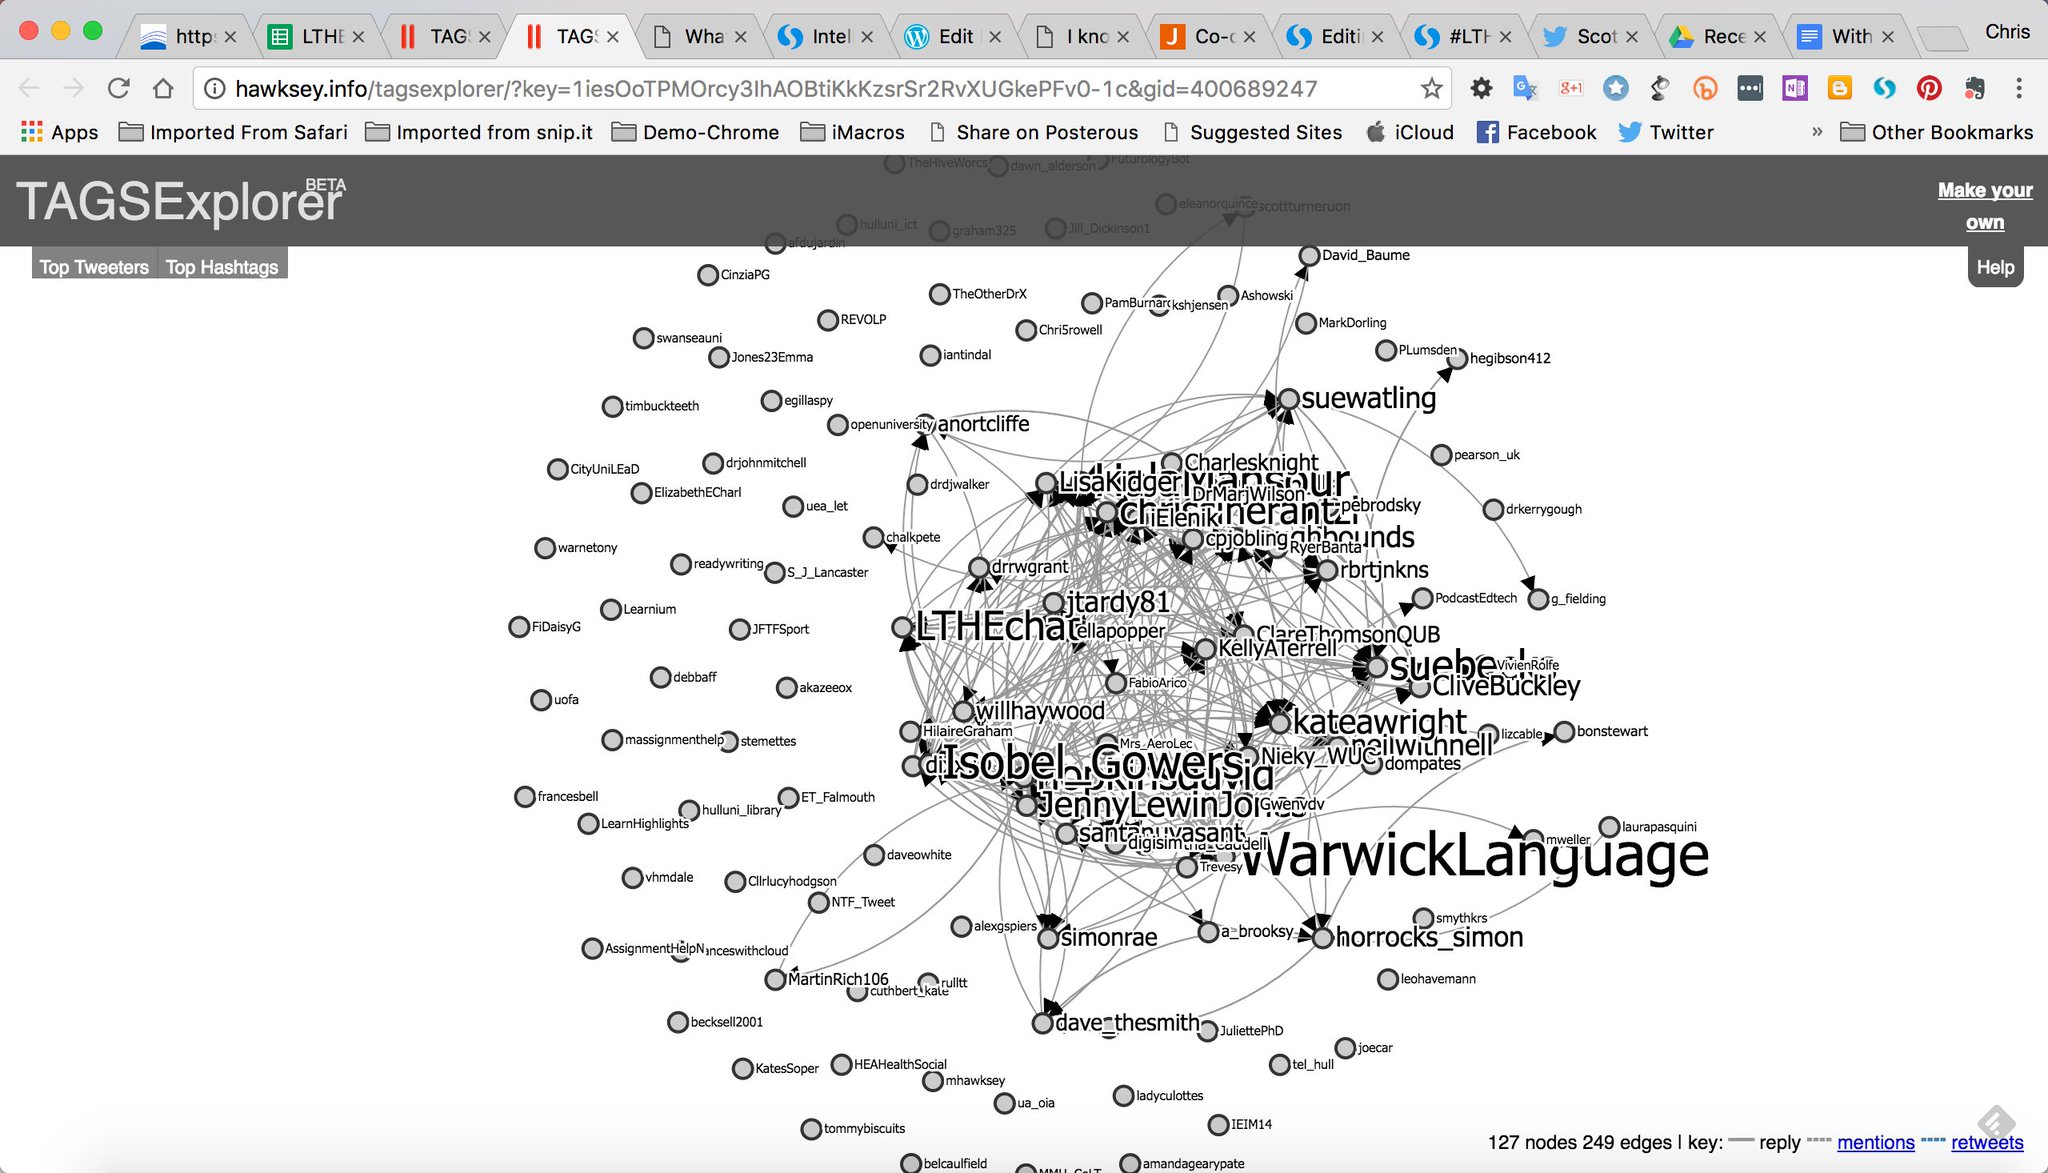 There were no new tweets to #LTHEChat 66 after 22:05. Here’s the final network visualisation: https://t.co/FToSA29LZV